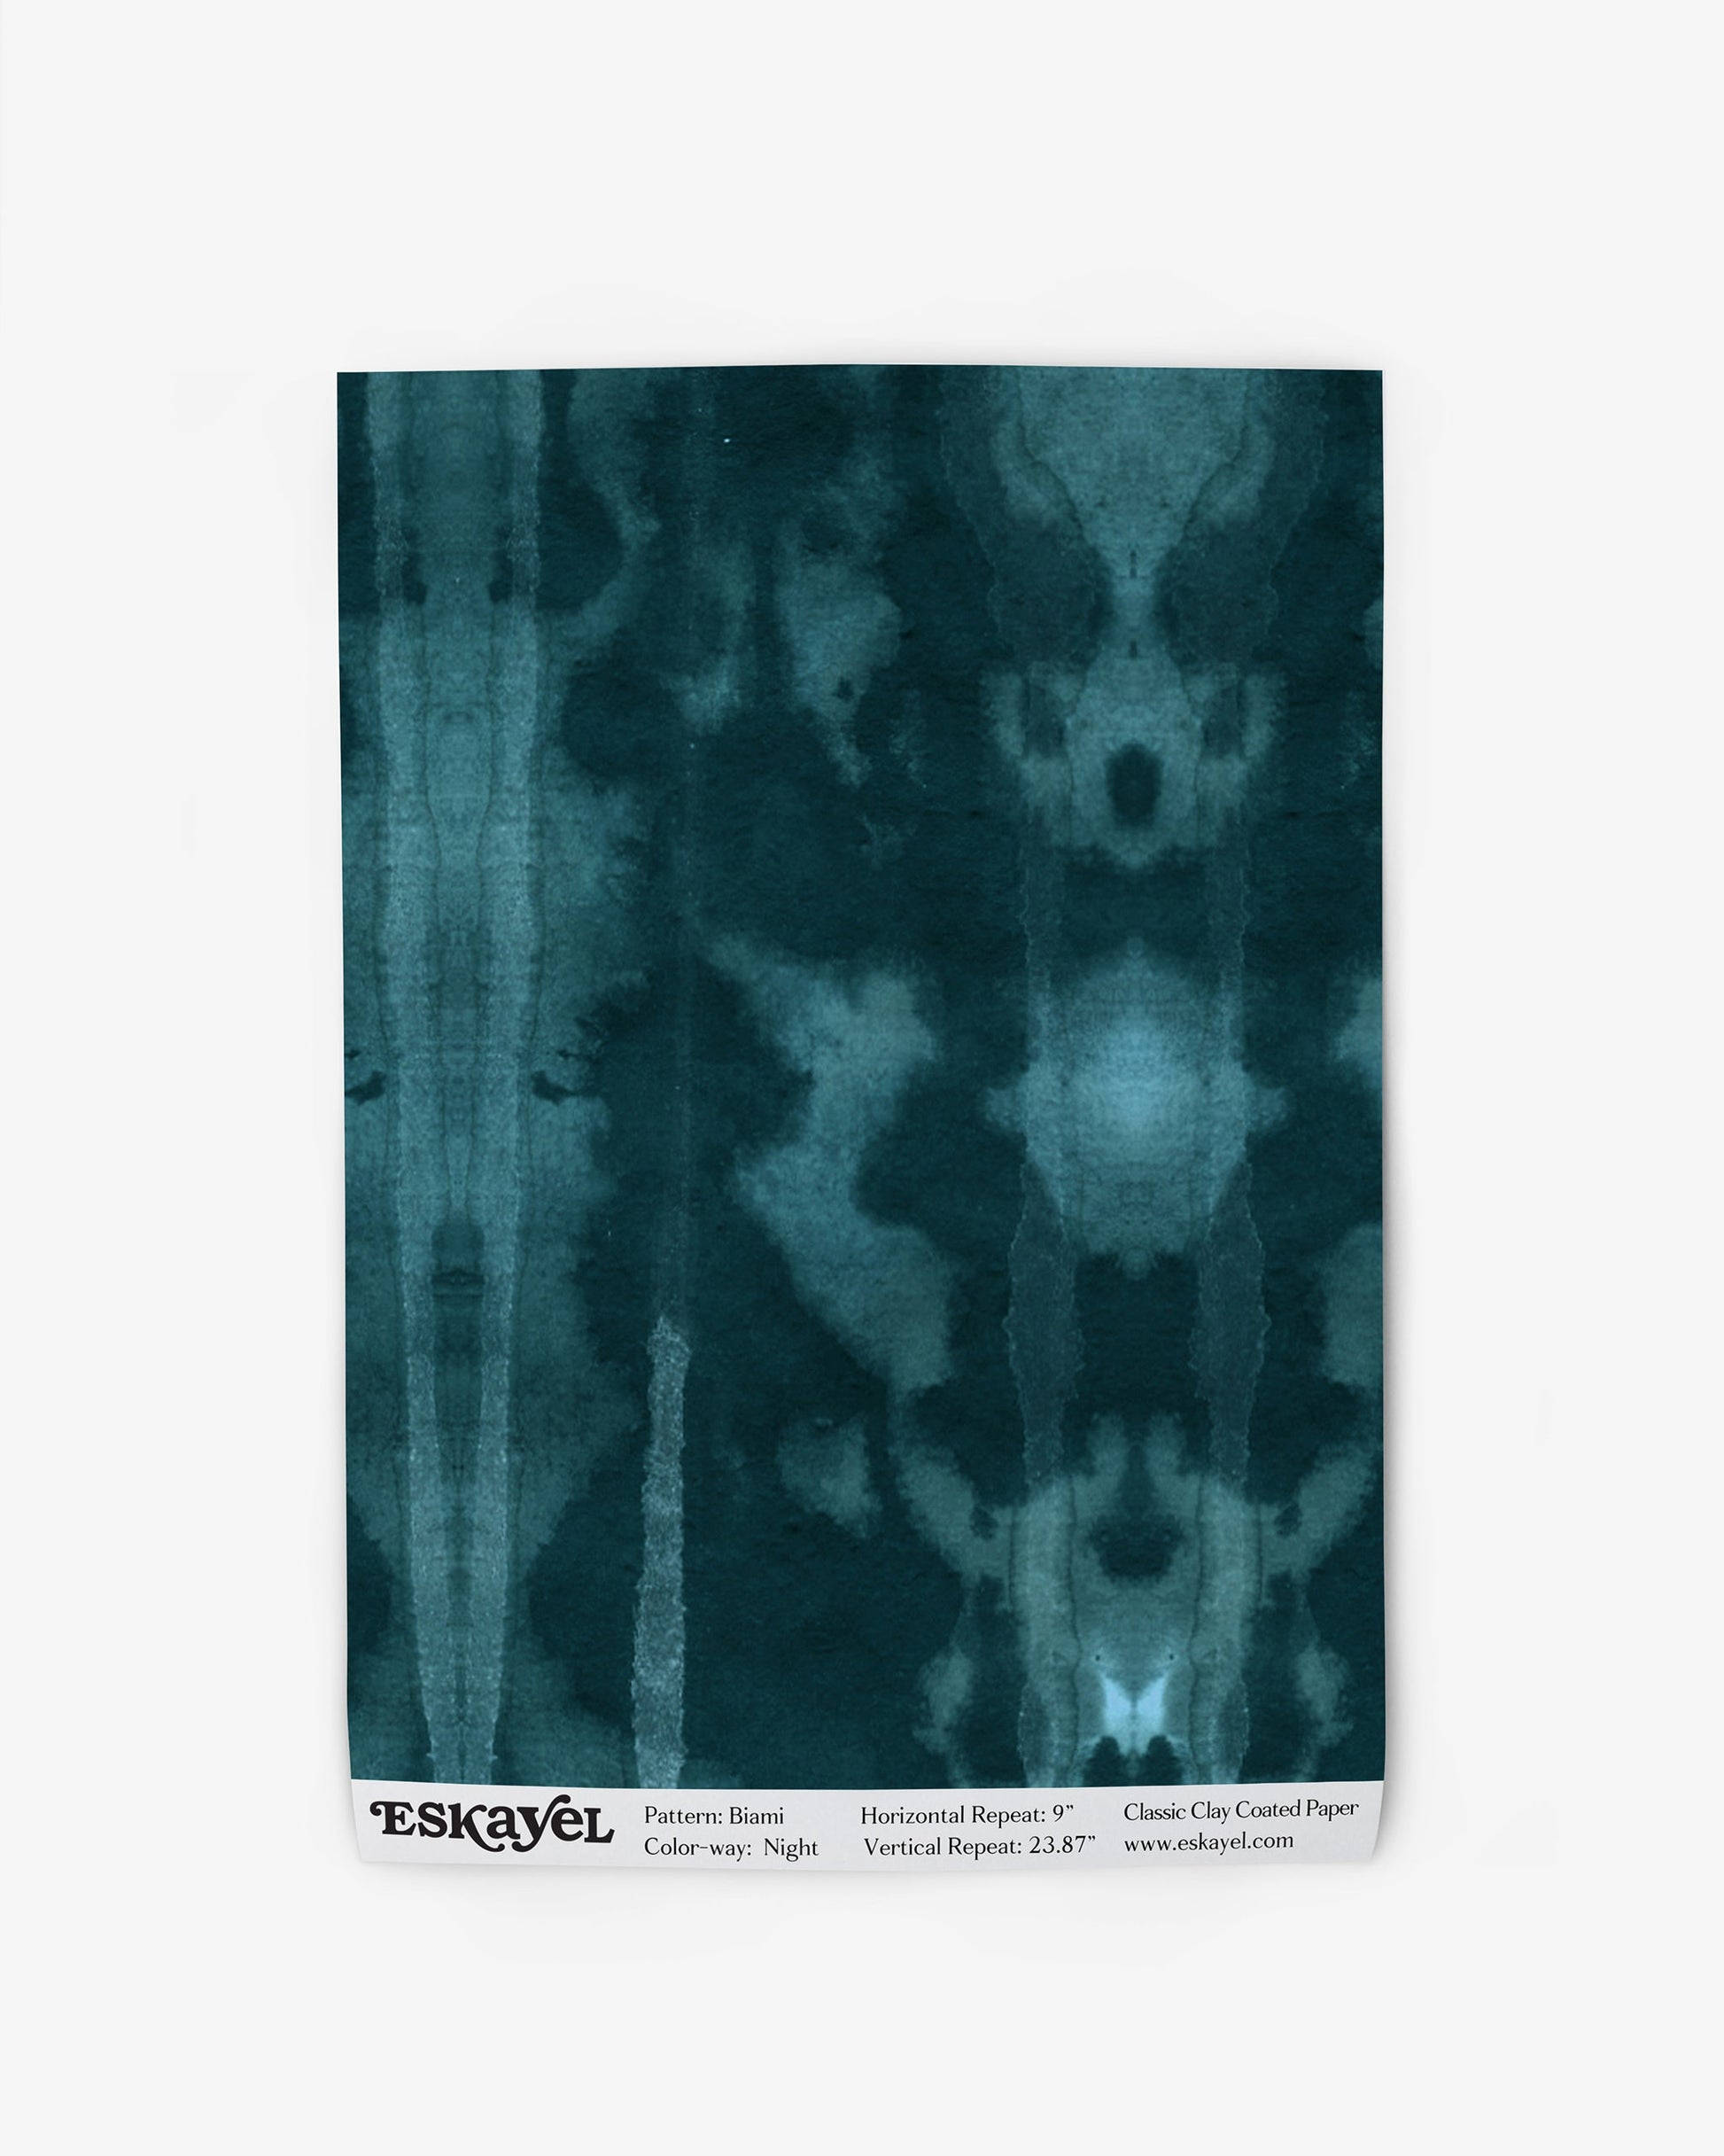 A high-end fabric with a teal and black Biami Wallpaper Night pattern on wallpaper